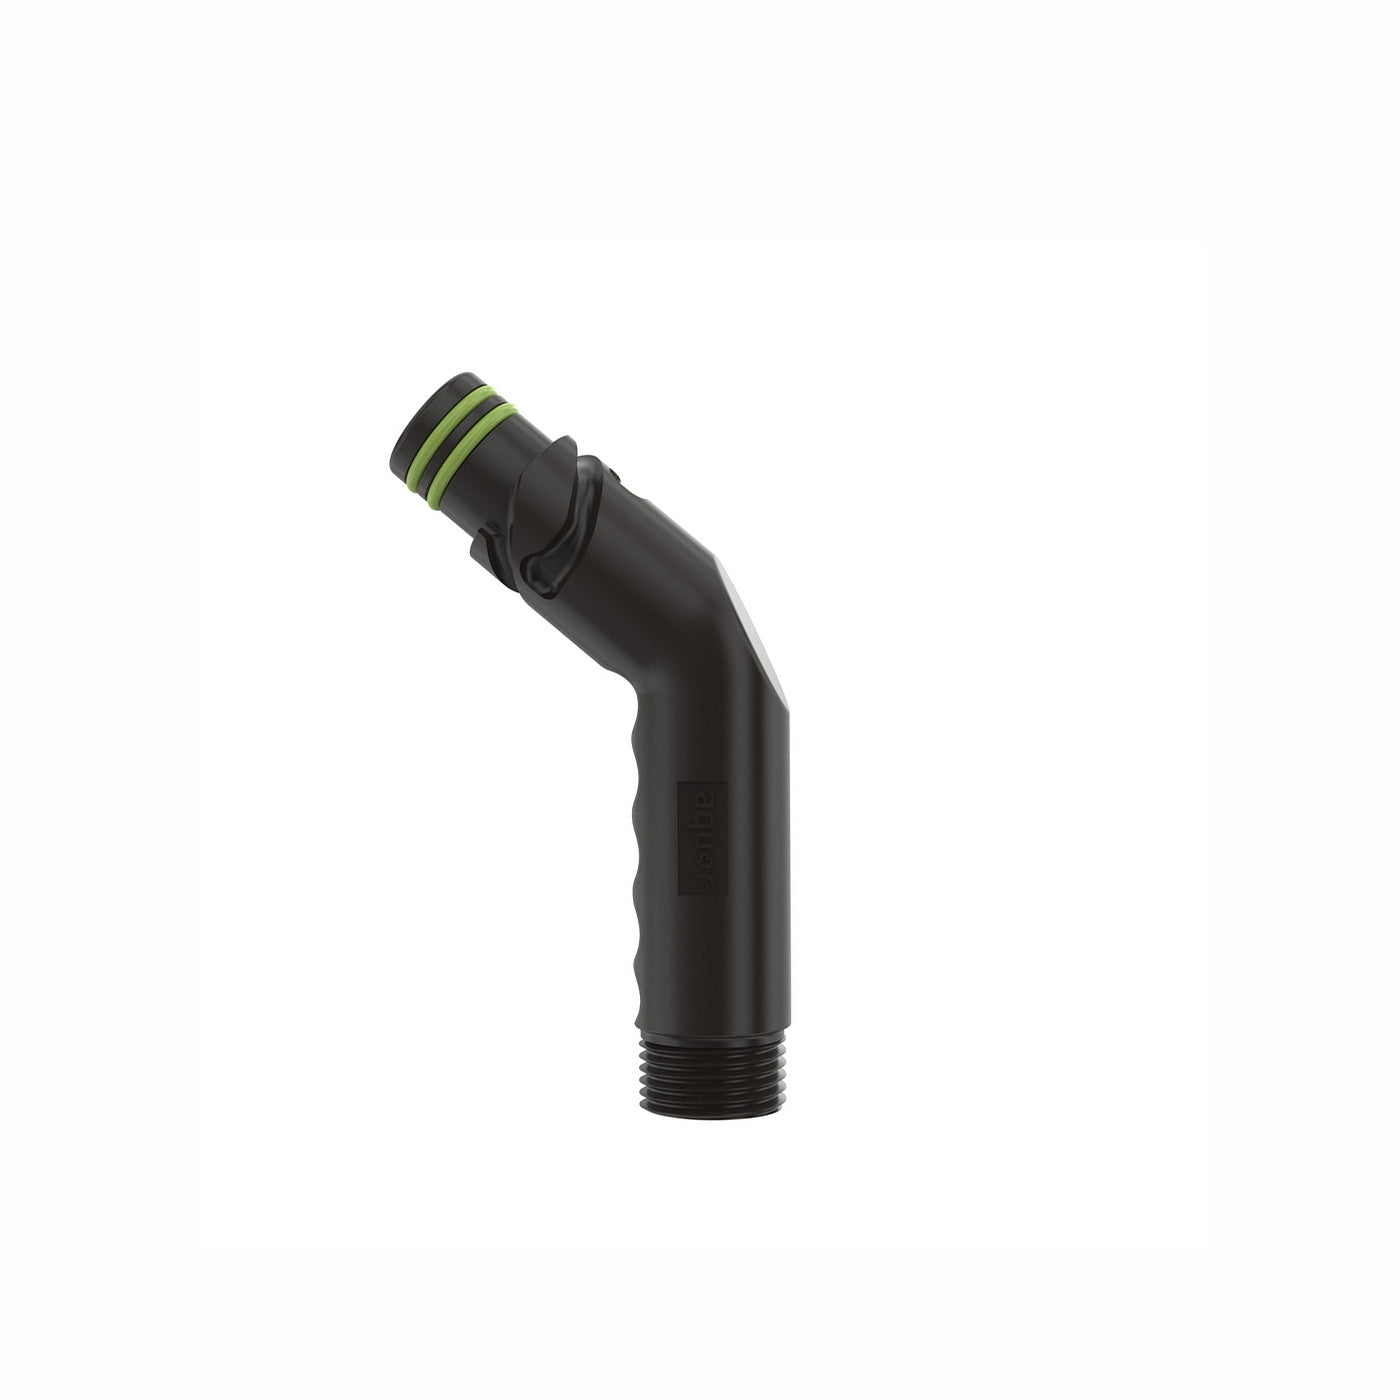 Angled Hose Connector